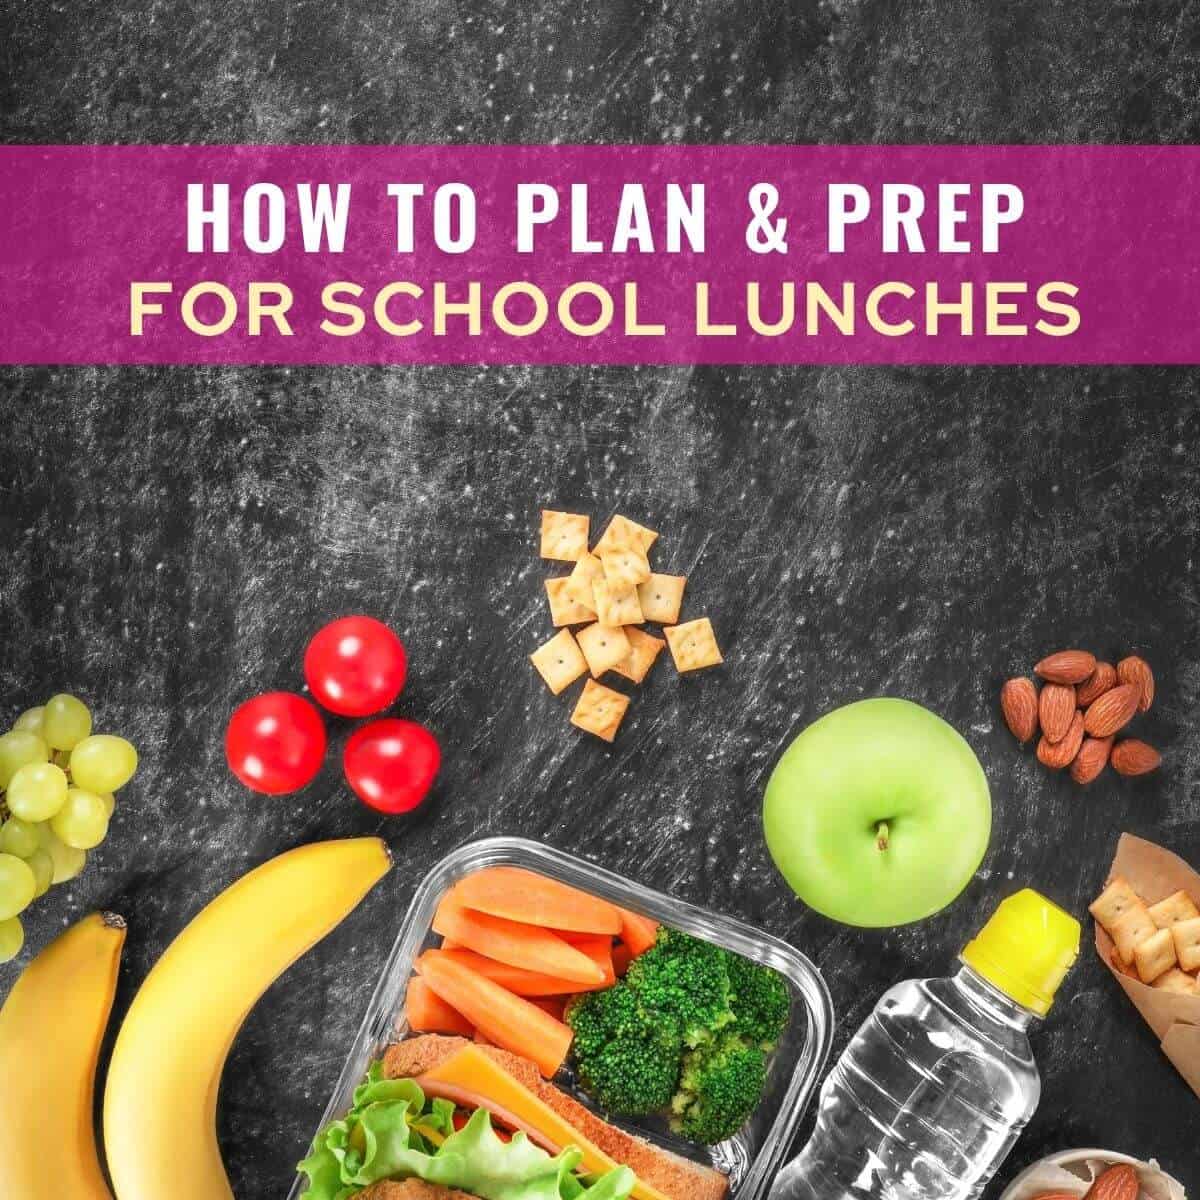 How to plan & prep for school lunches